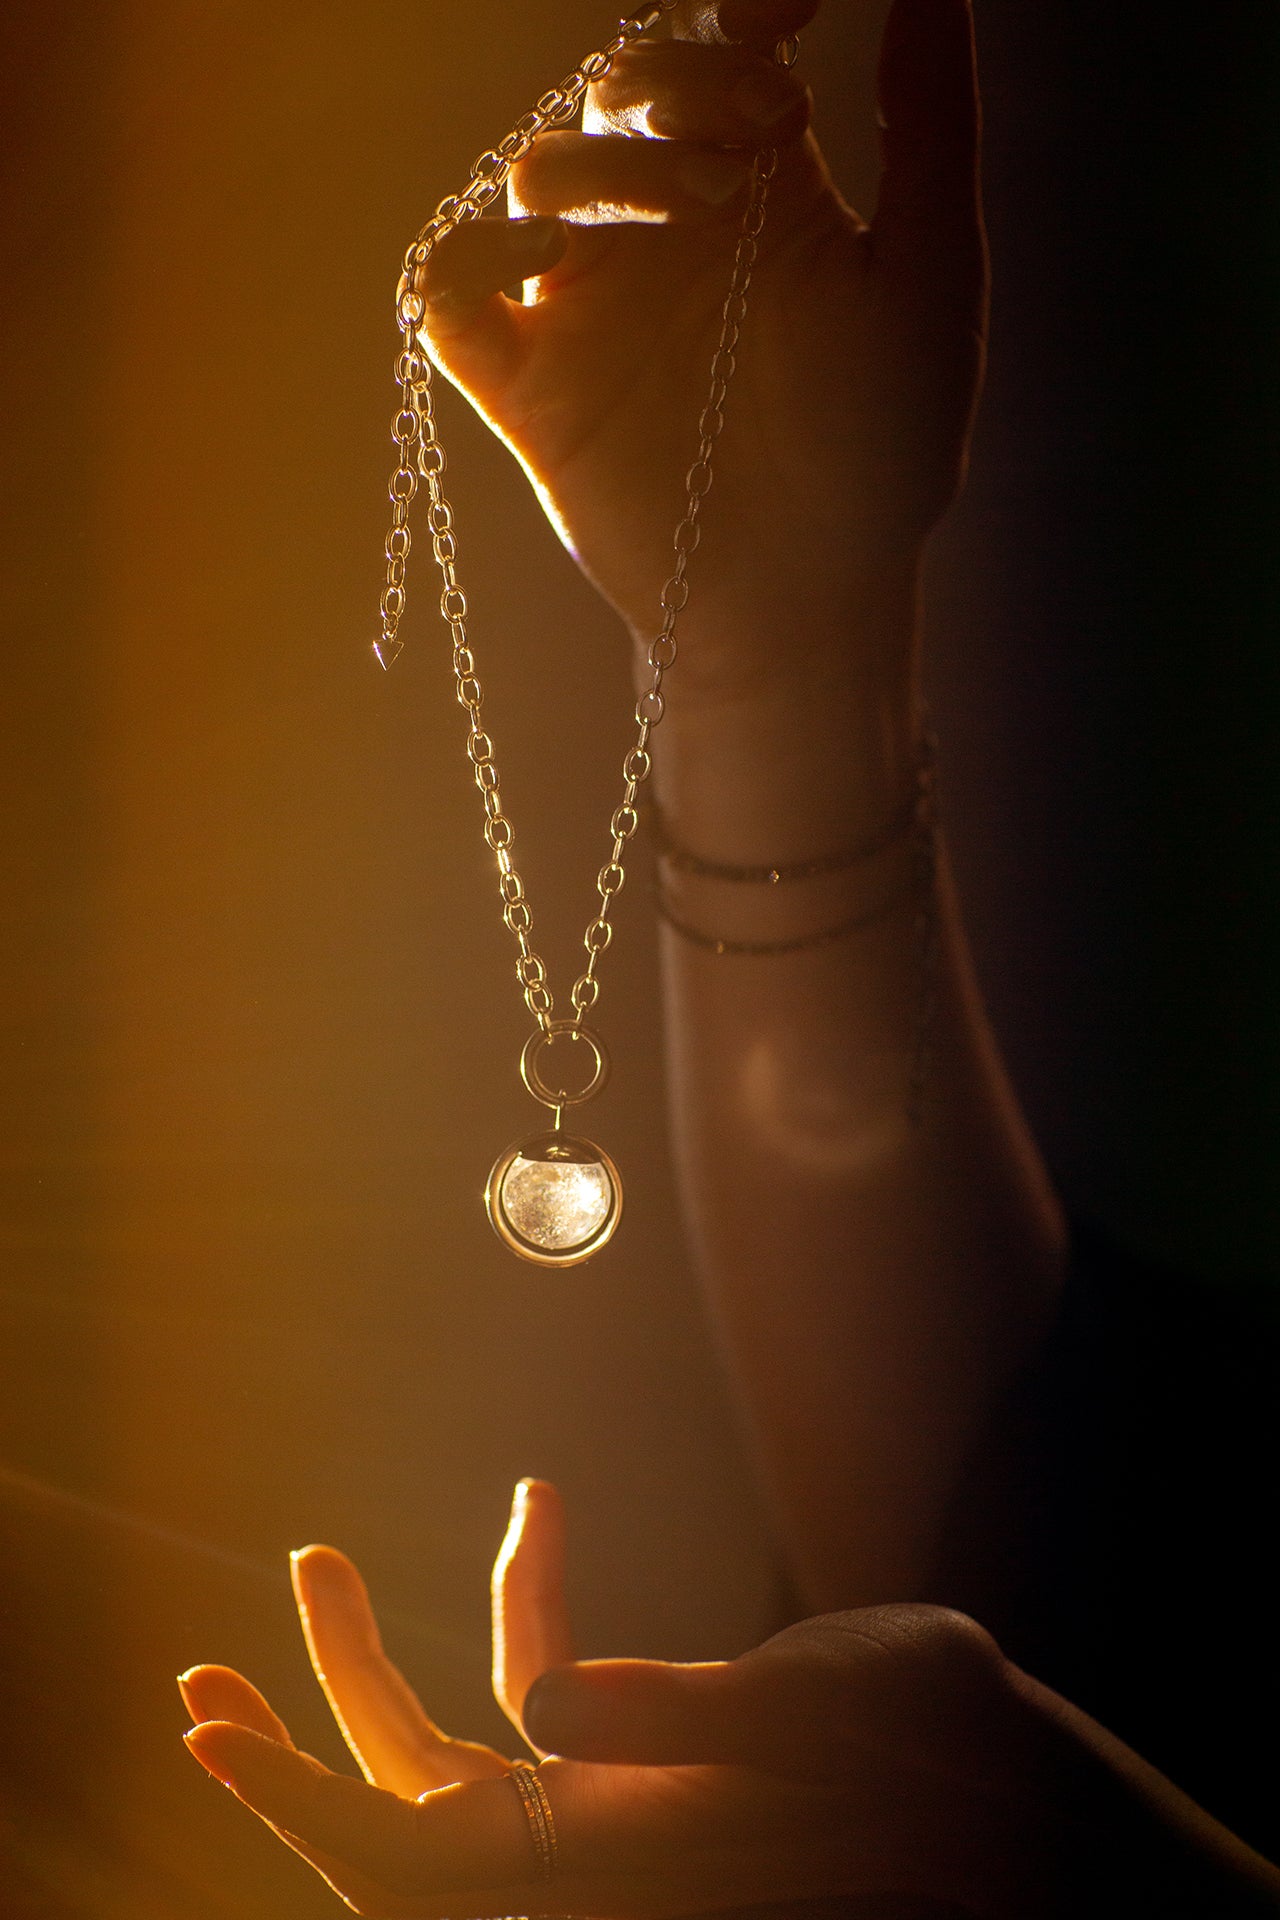 Emily Eliza Arlotte Handcrafted Fine Jewellery Magical Image of Hands Holding Sterling Silver Handmade Necklace with Crystal Ball Fortune Teller Vibes Mystical Boho Witchy Chunky Chain Made in Tasmania Australia Photography by Cassie Sullivan